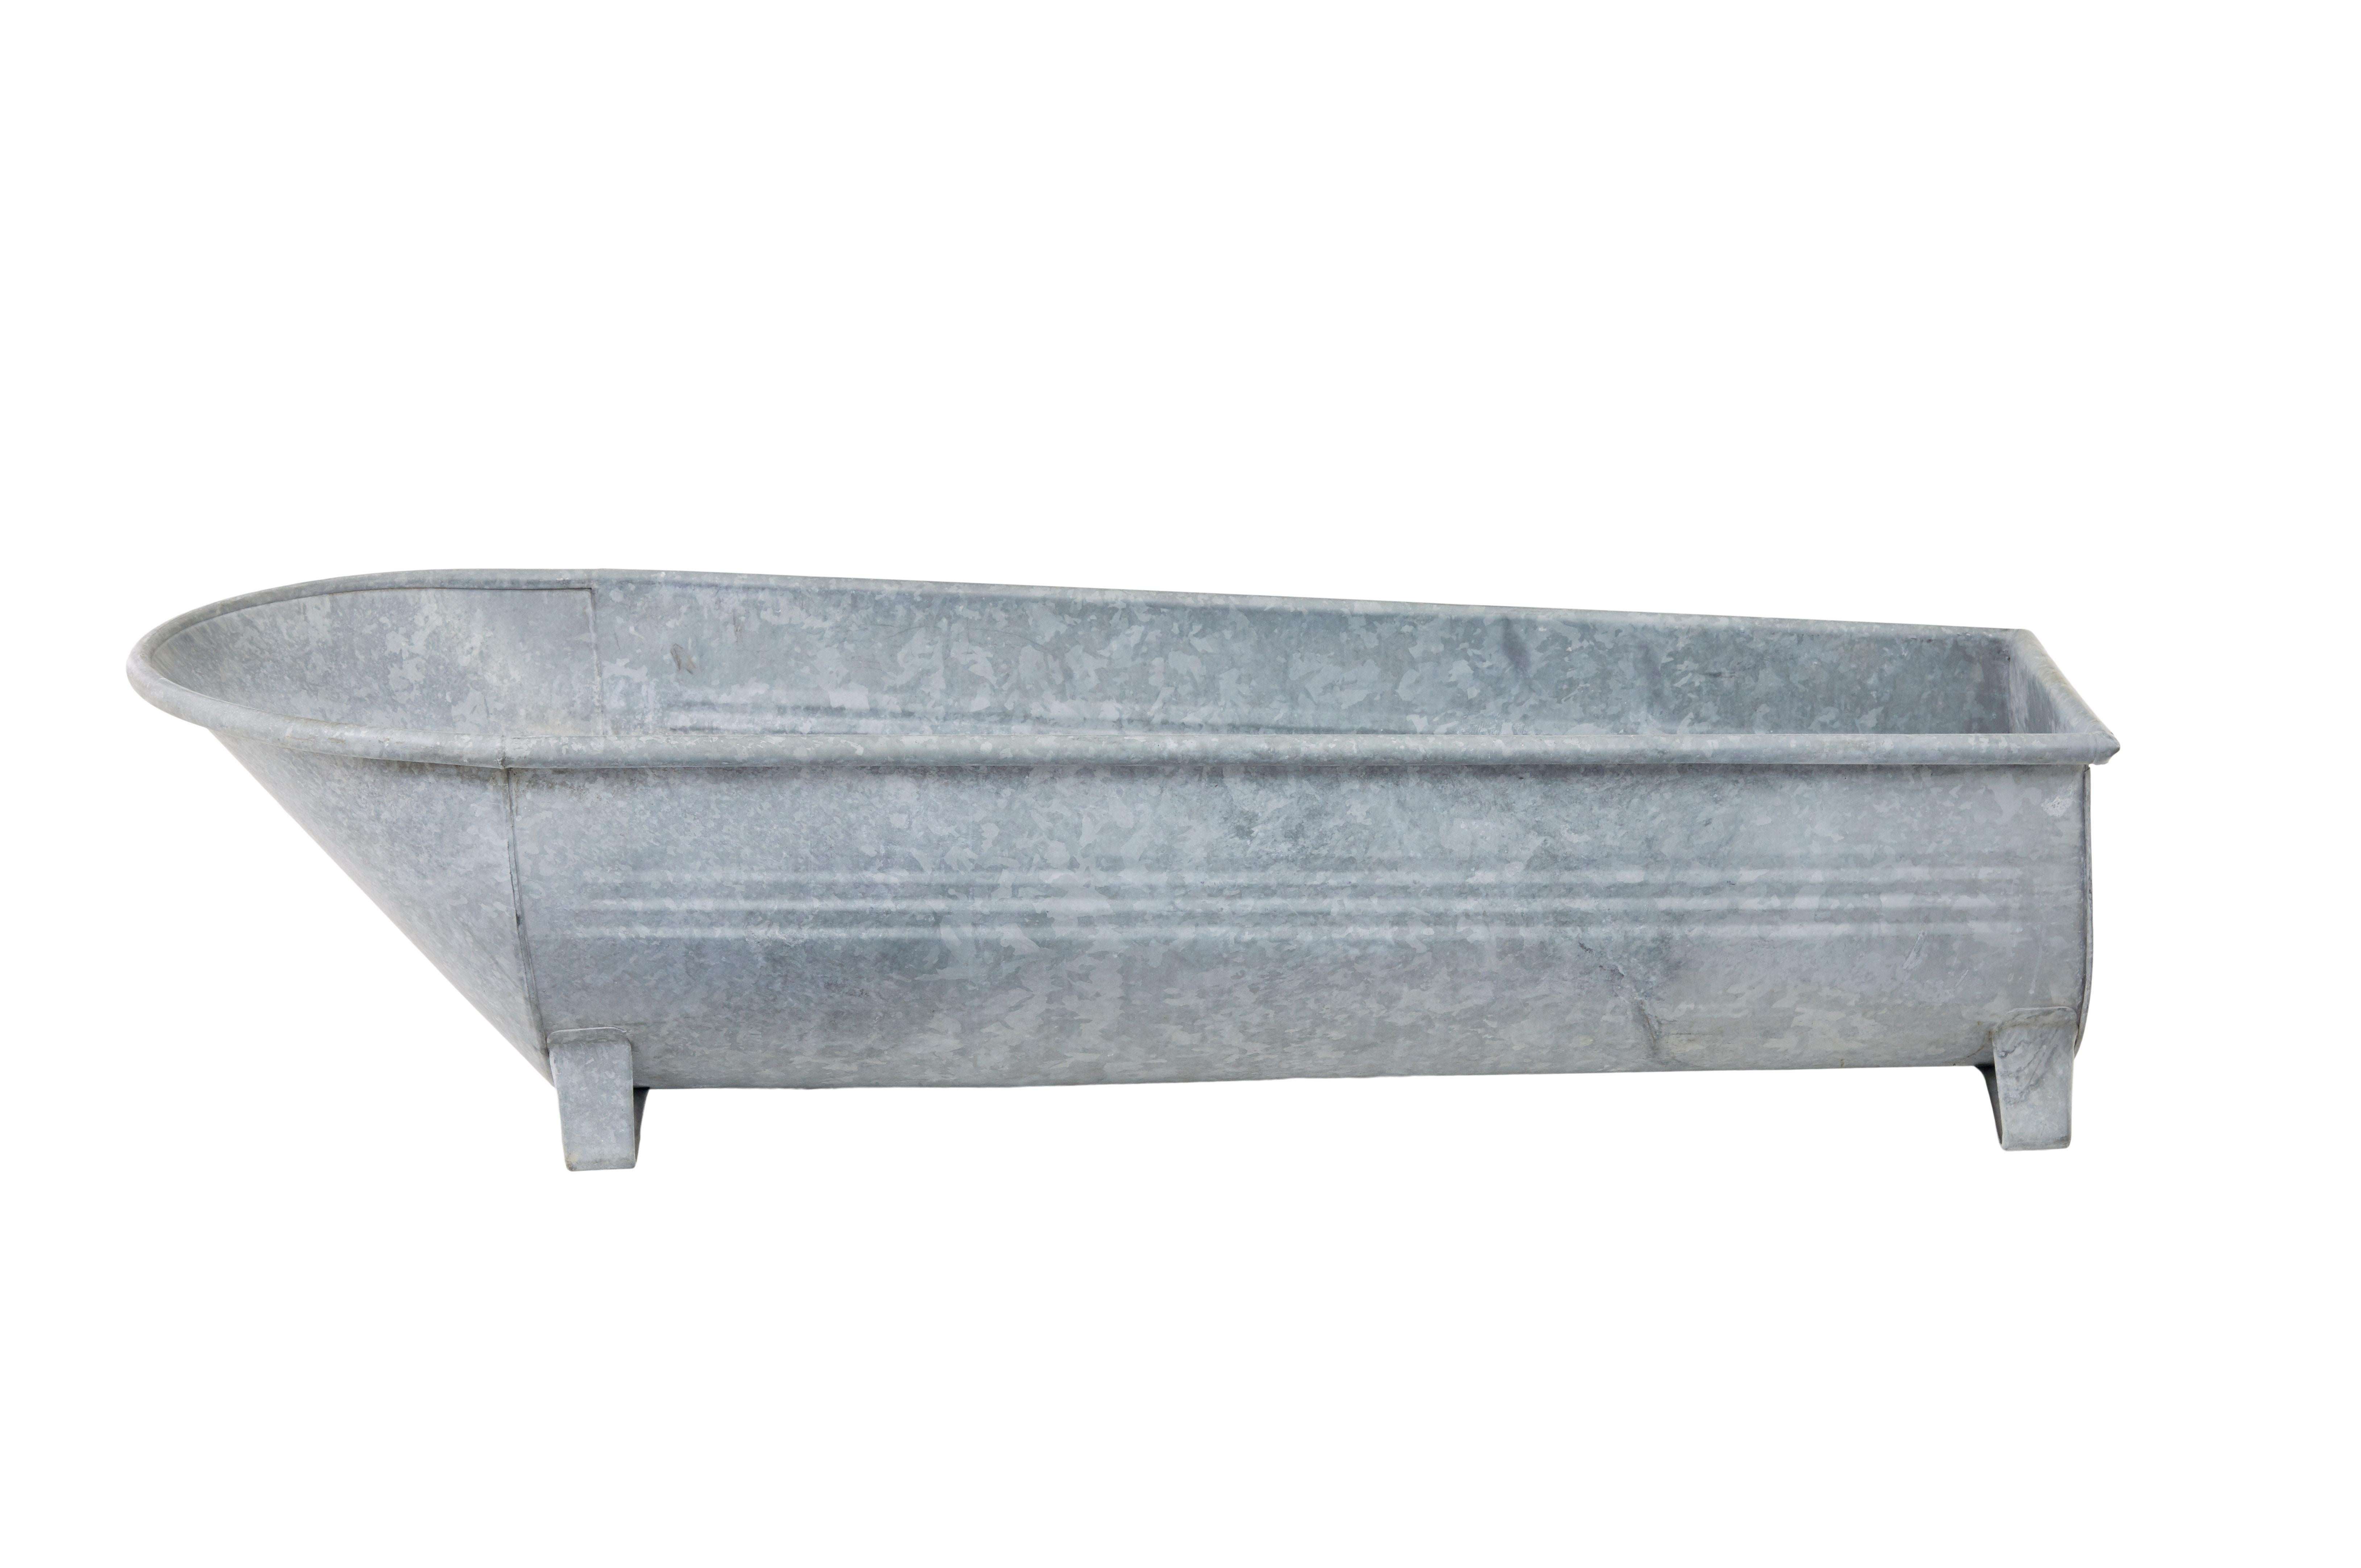 Mid century galvanised tin bath circa 1940.

Good quality Scandinavian tin bath which would also function well as a garden planter or installation.  Made from galvanised tin to prevent rusting, coffin shaped with a roll top lip, standing on shaped